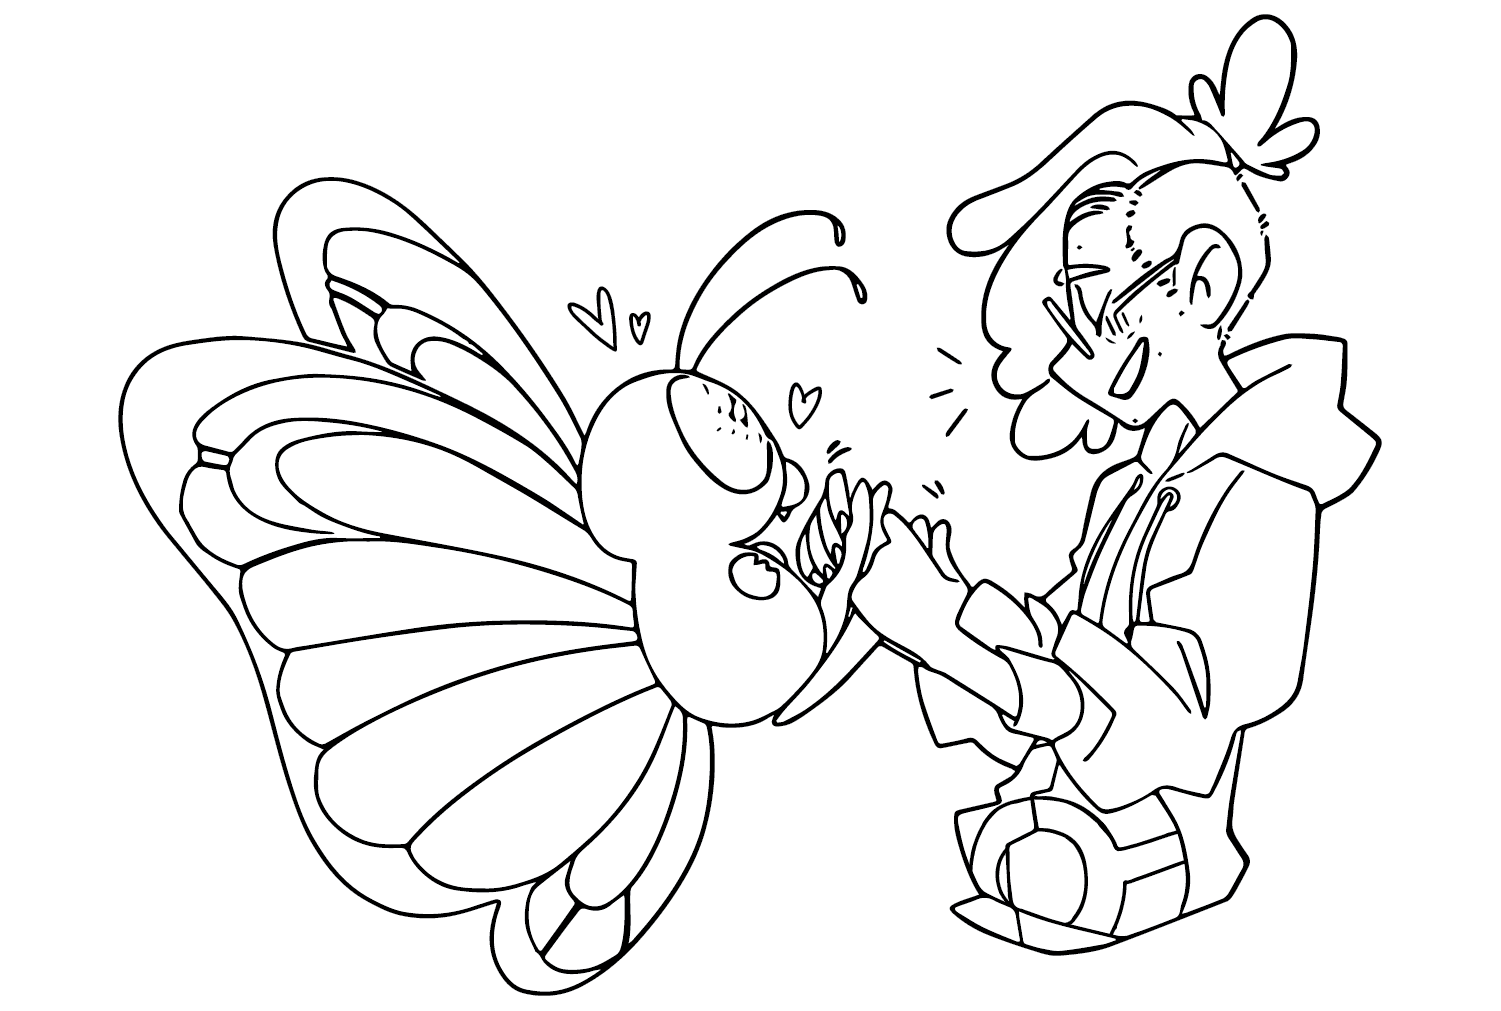 Butterfree Coloring Page to Print from Butterfree